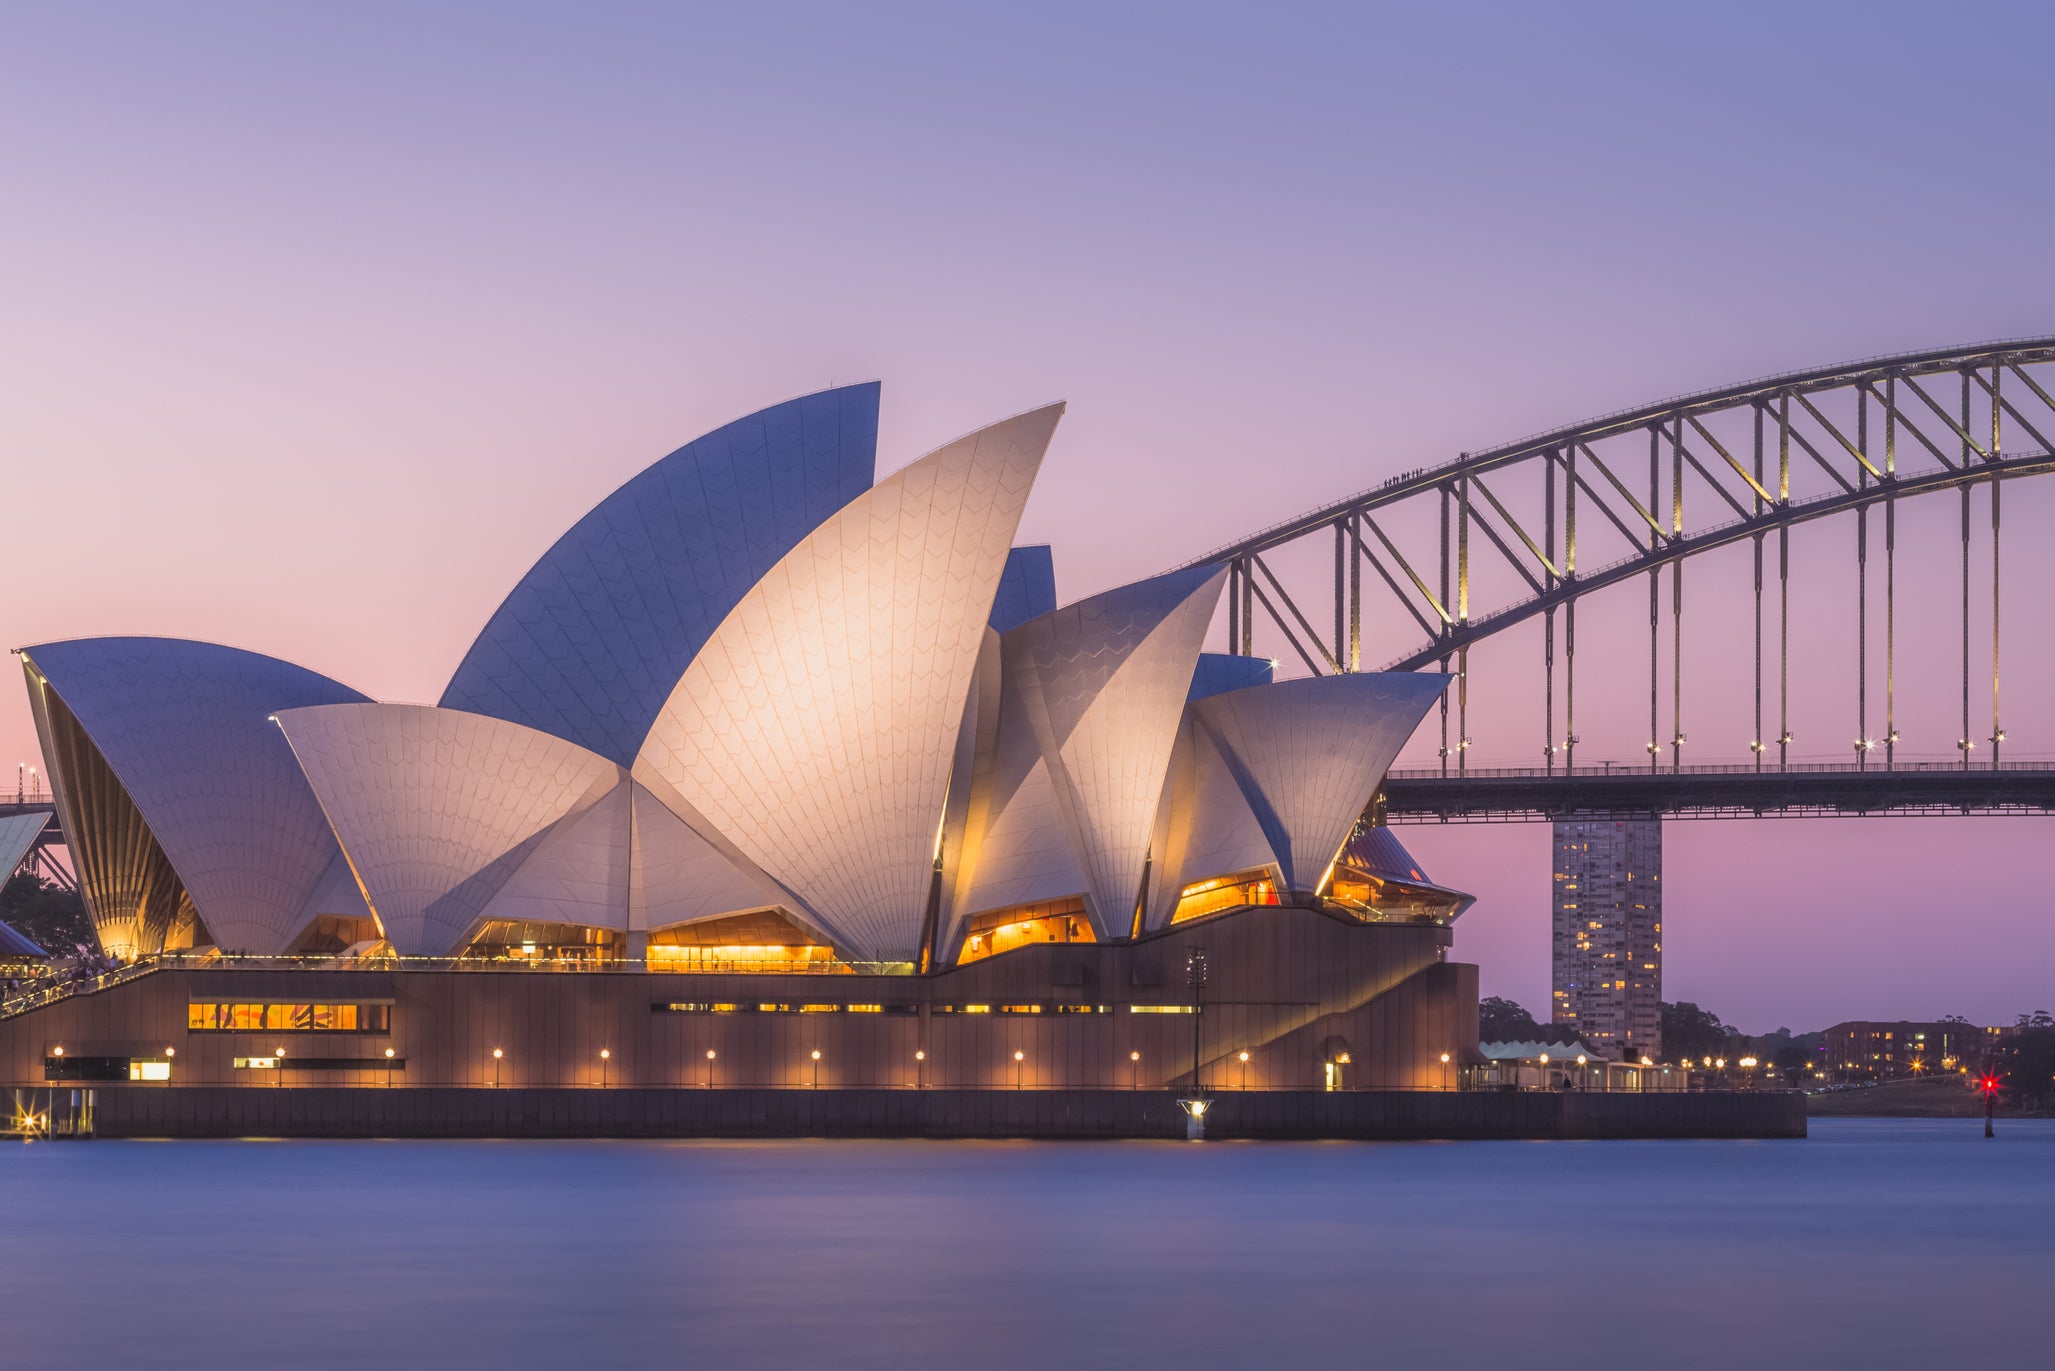 Sydney Opera House was named a Unesco World Heritage Site in 2007